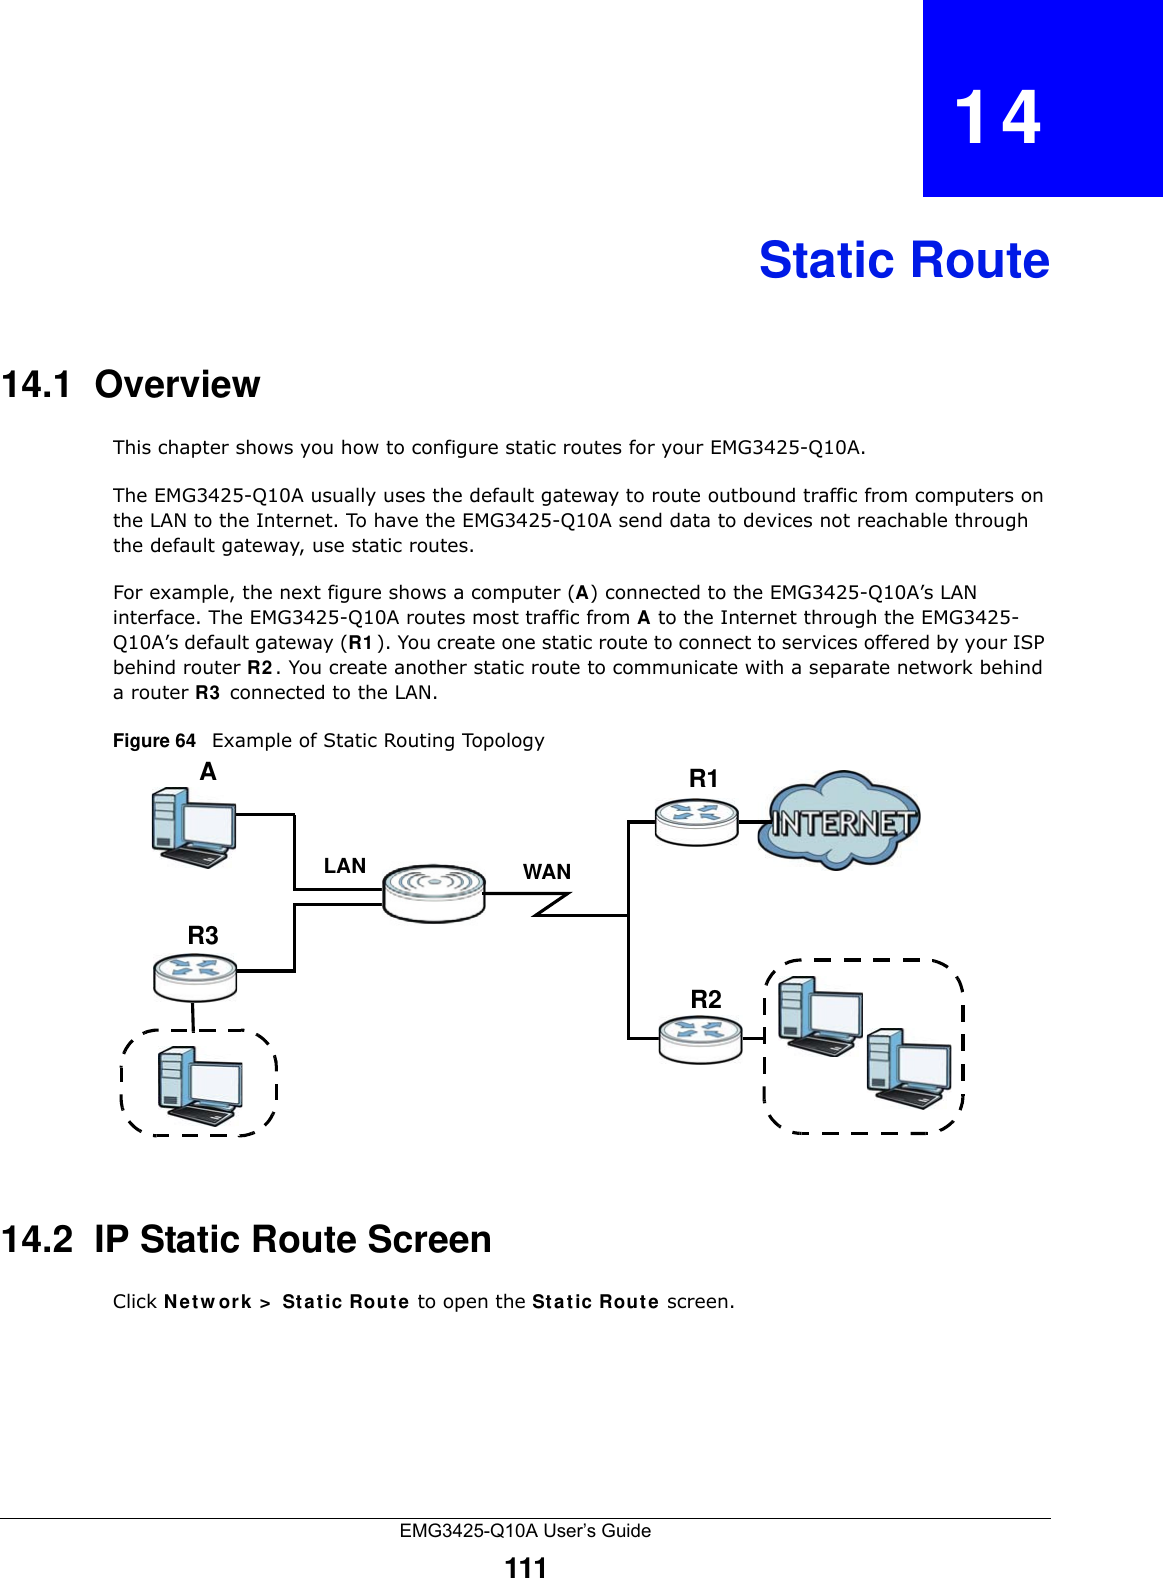 EMG3425-Q10A User’s Guide111CHAPTER   14Static Route14.1  Overview   This chapter shows you how to configure static routes for your EMG3425-Q10A.The EMG3425-Q10A usually uses the default gateway to route outbound traffic from computers on the LAN to the Internet. To have the EMG3425-Q10A send data to devices not reachable through the default gateway, use static routes.For example, the next figure shows a computer (A) connected to the EMG3425-Q10A’s LAN interface. The EMG3425-Q10A routes most traffic from A to the Internet through the EMG3425-Q10A’s default gateway (R1 ). You create one static route to connect to services offered by your ISP behind router R2 . You create another static route to communicate with a separate network behind a router R3  connected to the LAN.Figure 64   Example of Static Routing Topology14.2  IP Static Route Screen Click N et w ork &gt;  Sta t ic Rout e  to open the St at ic Route screen. WANR1R2AR3LAN